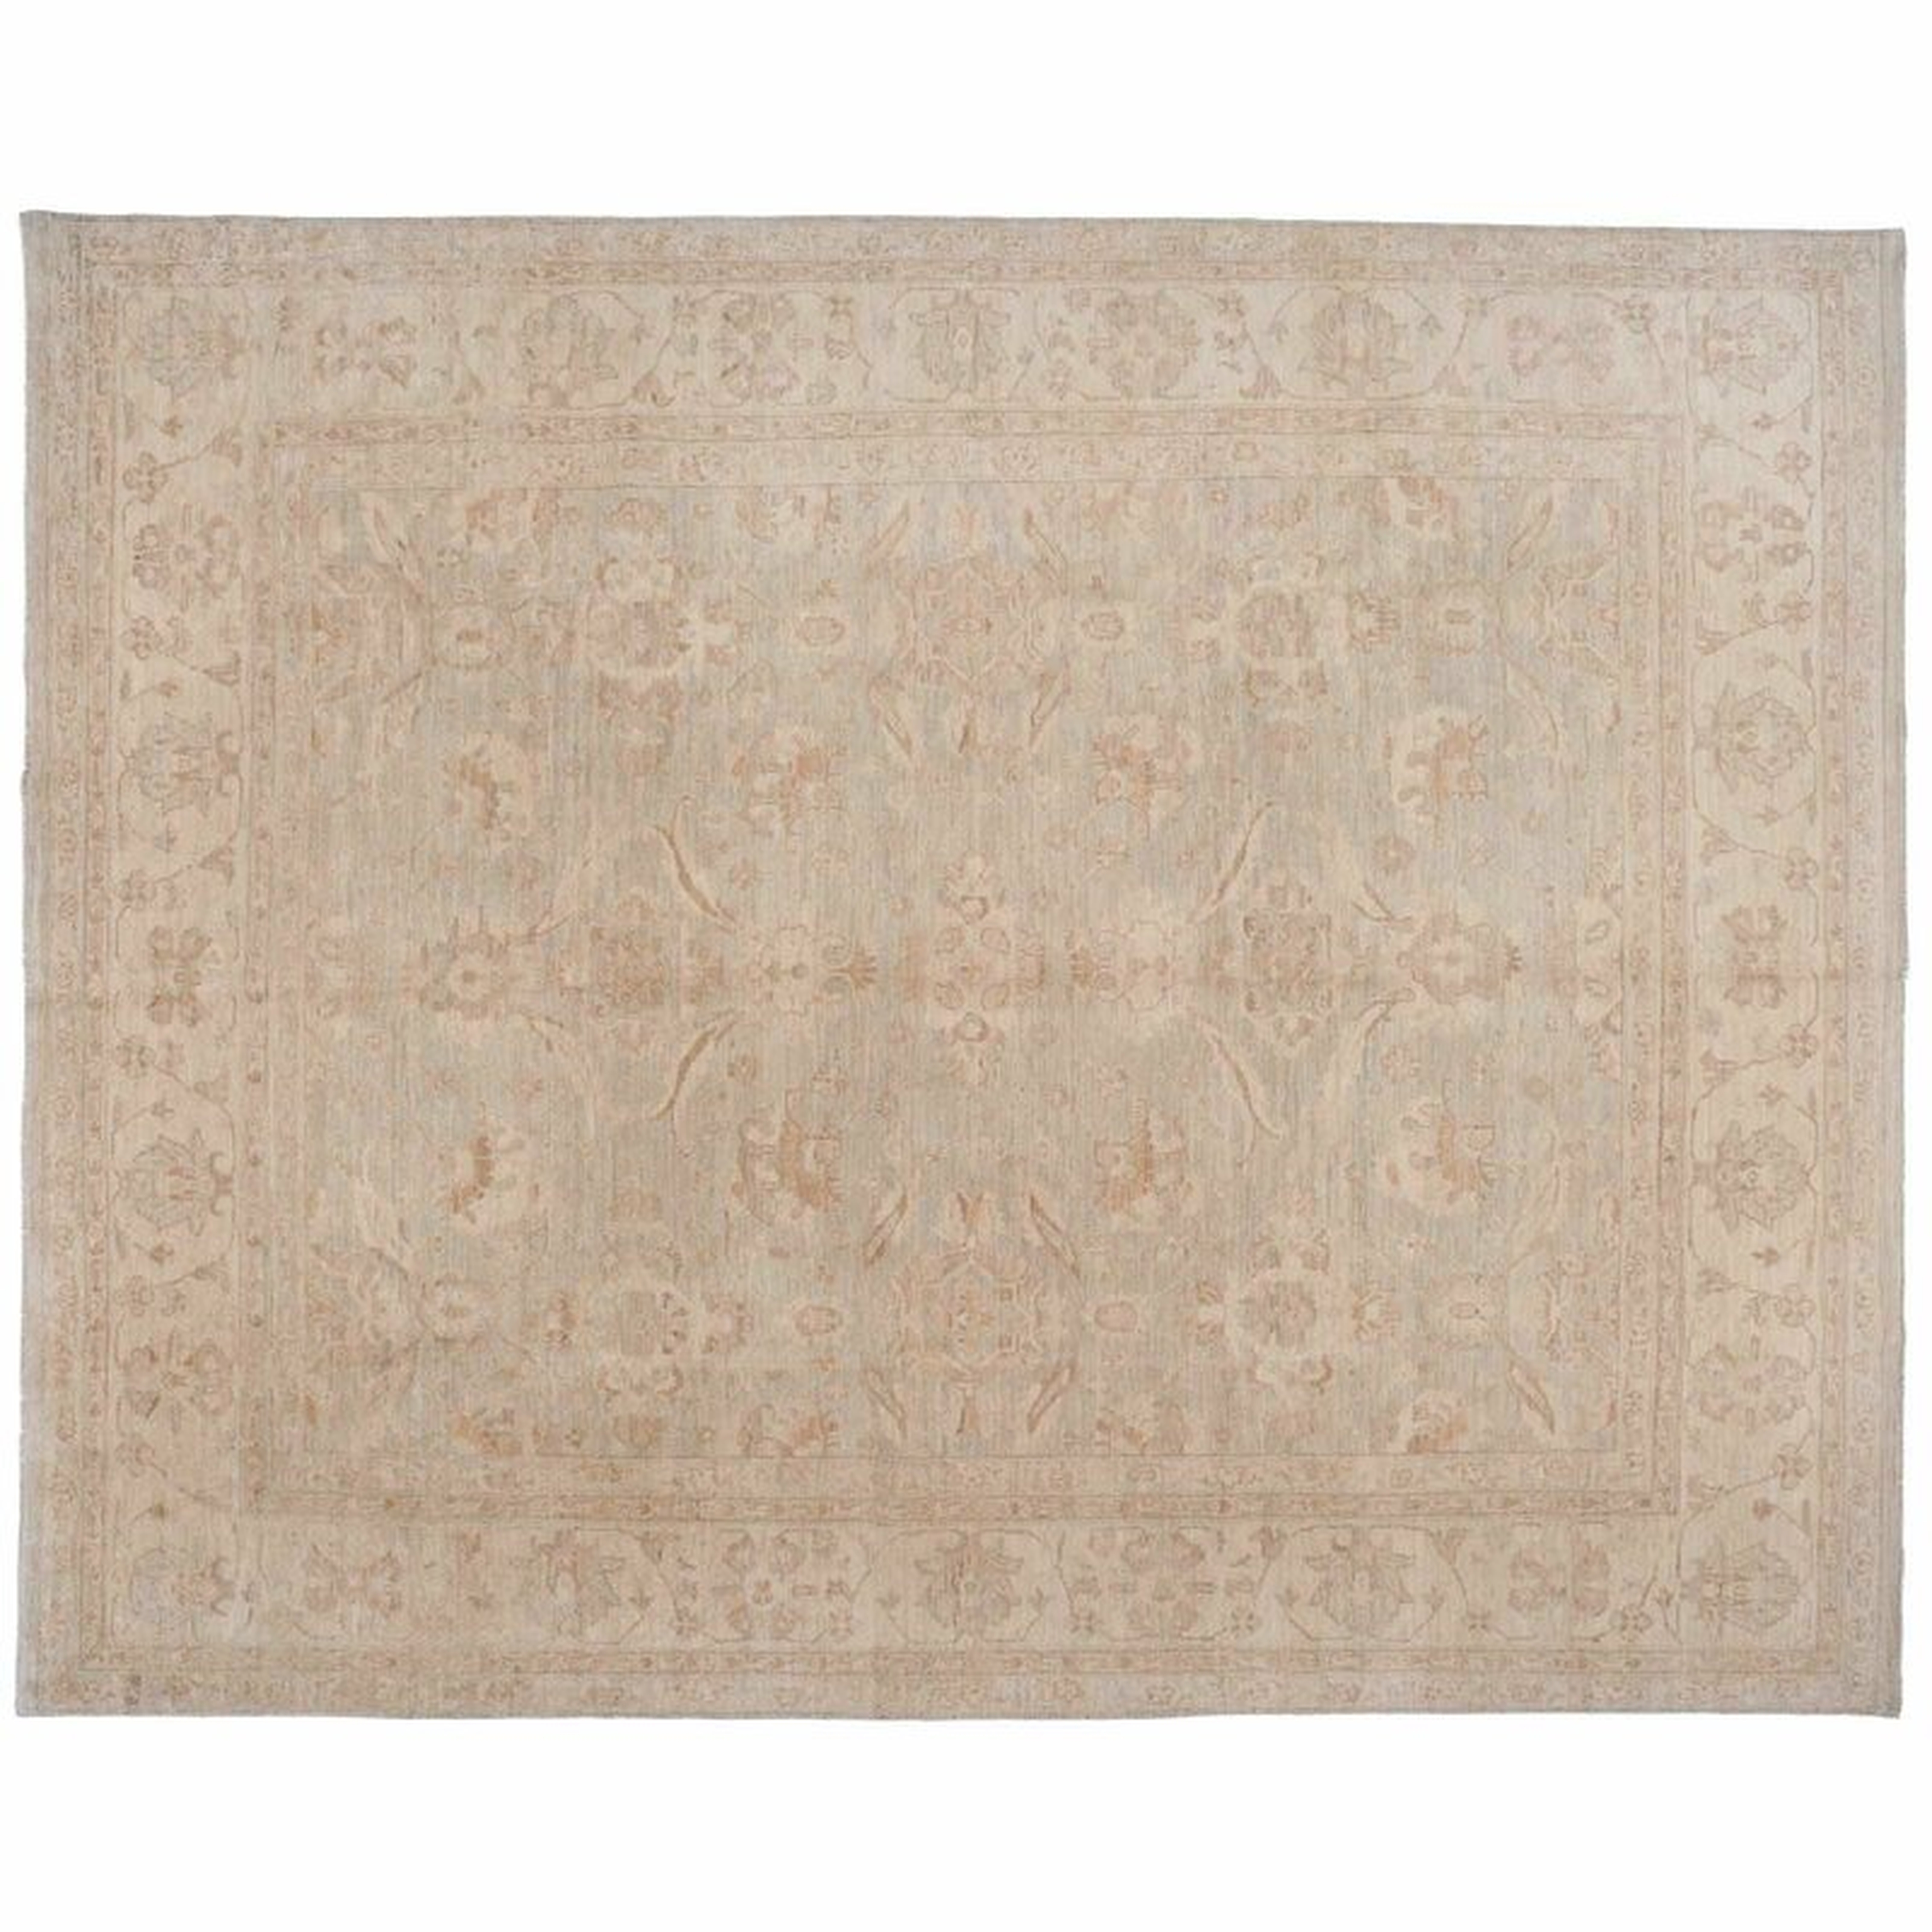 Aga John Oriental Rugs One-of-a-Kind Hand-Knotted Beige/Light Green 8' x 10' Wool Area Rug - Perigold